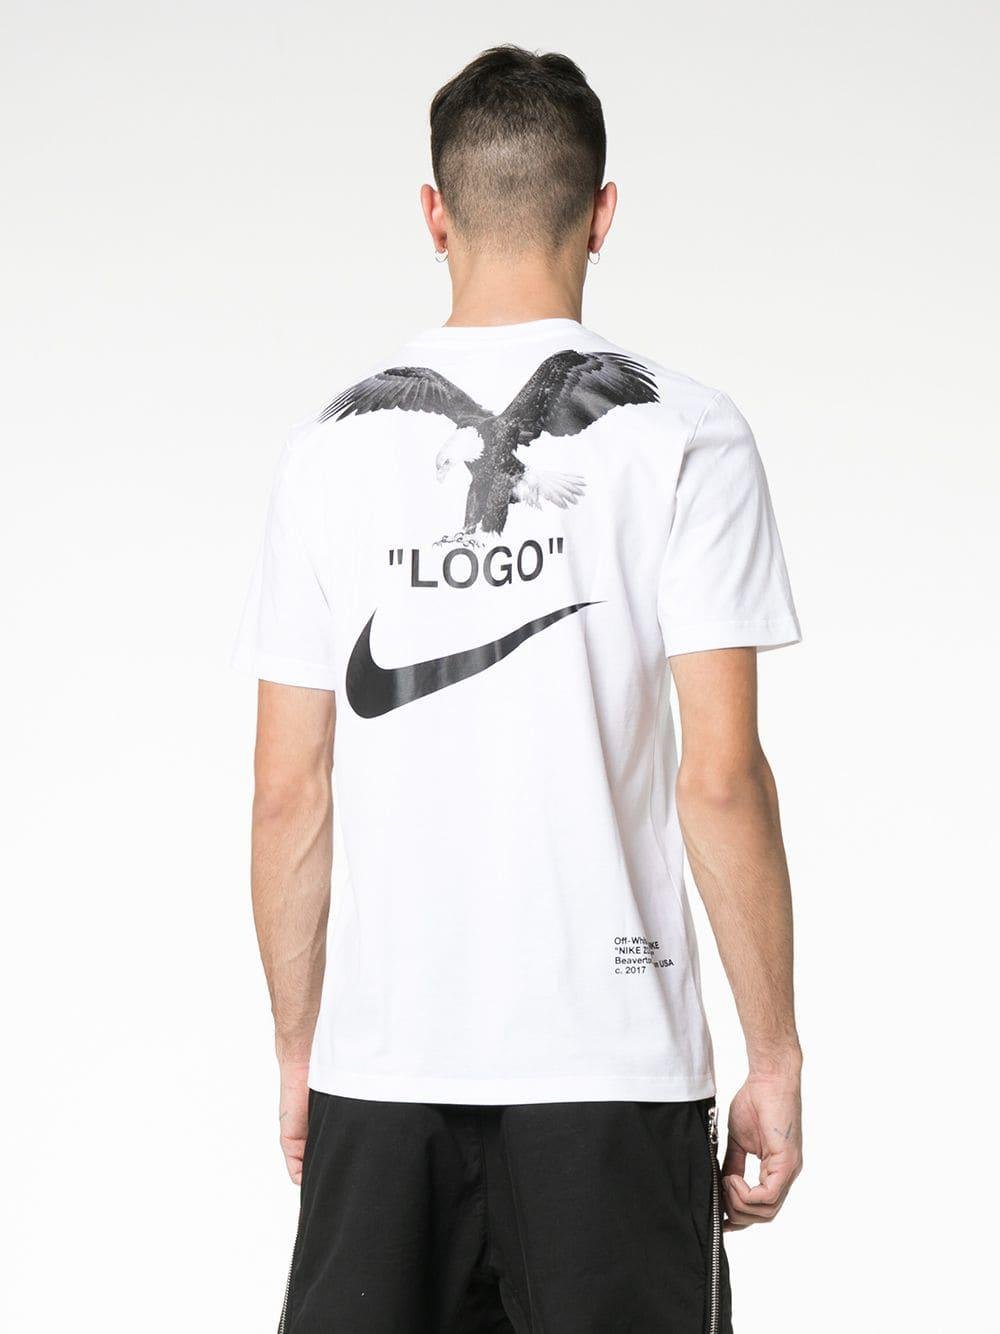 off white nike polo,Exclusive Deals and Offers,OFF 66%